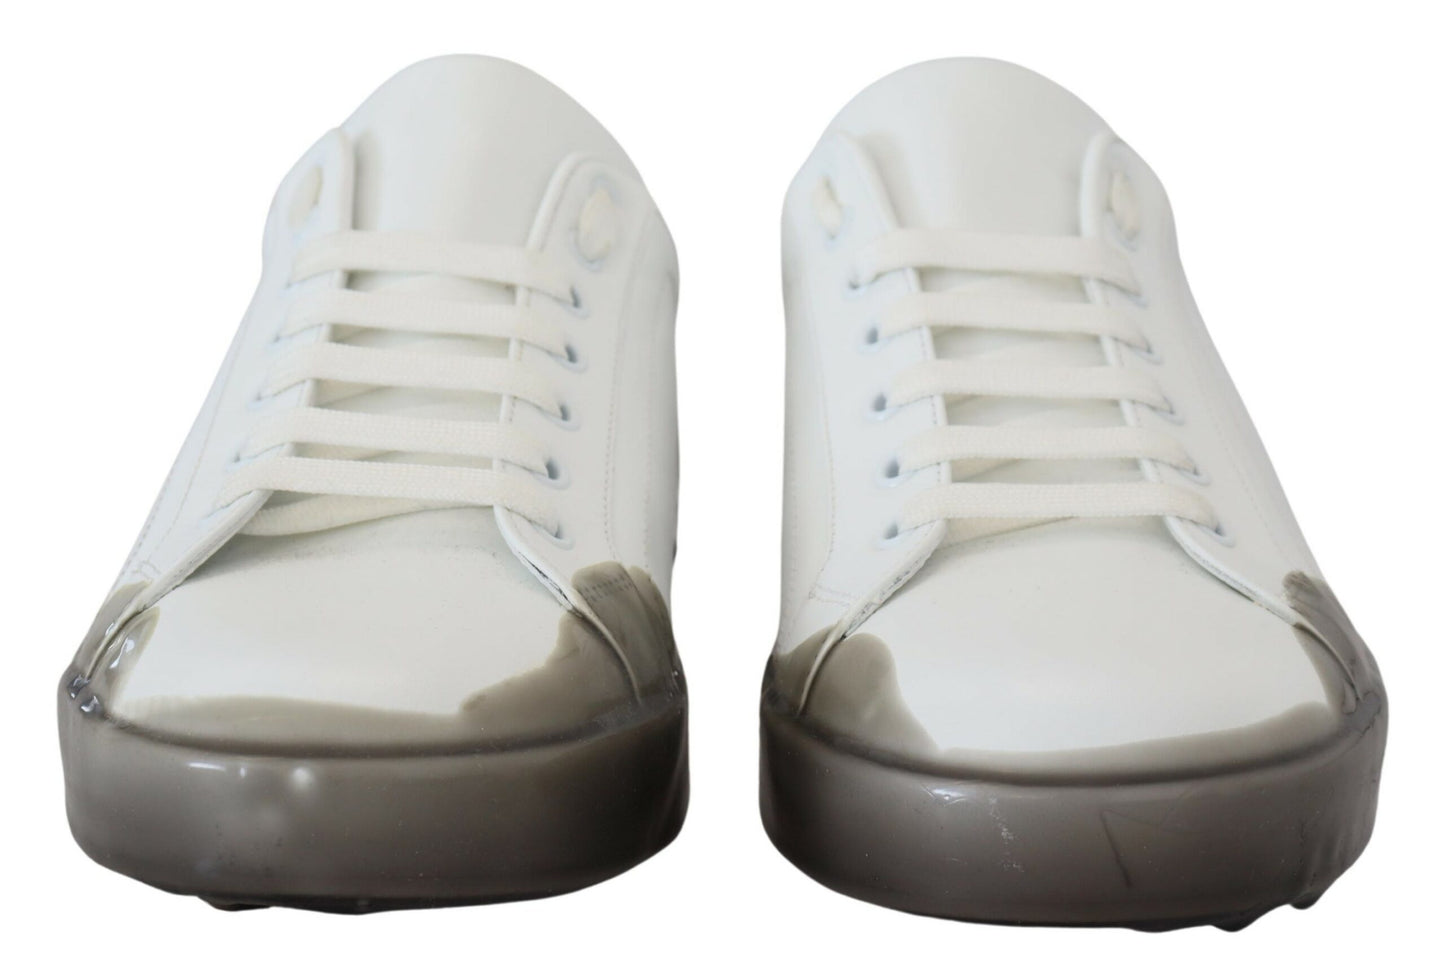 Elegant White Low Top Leather Sneakers